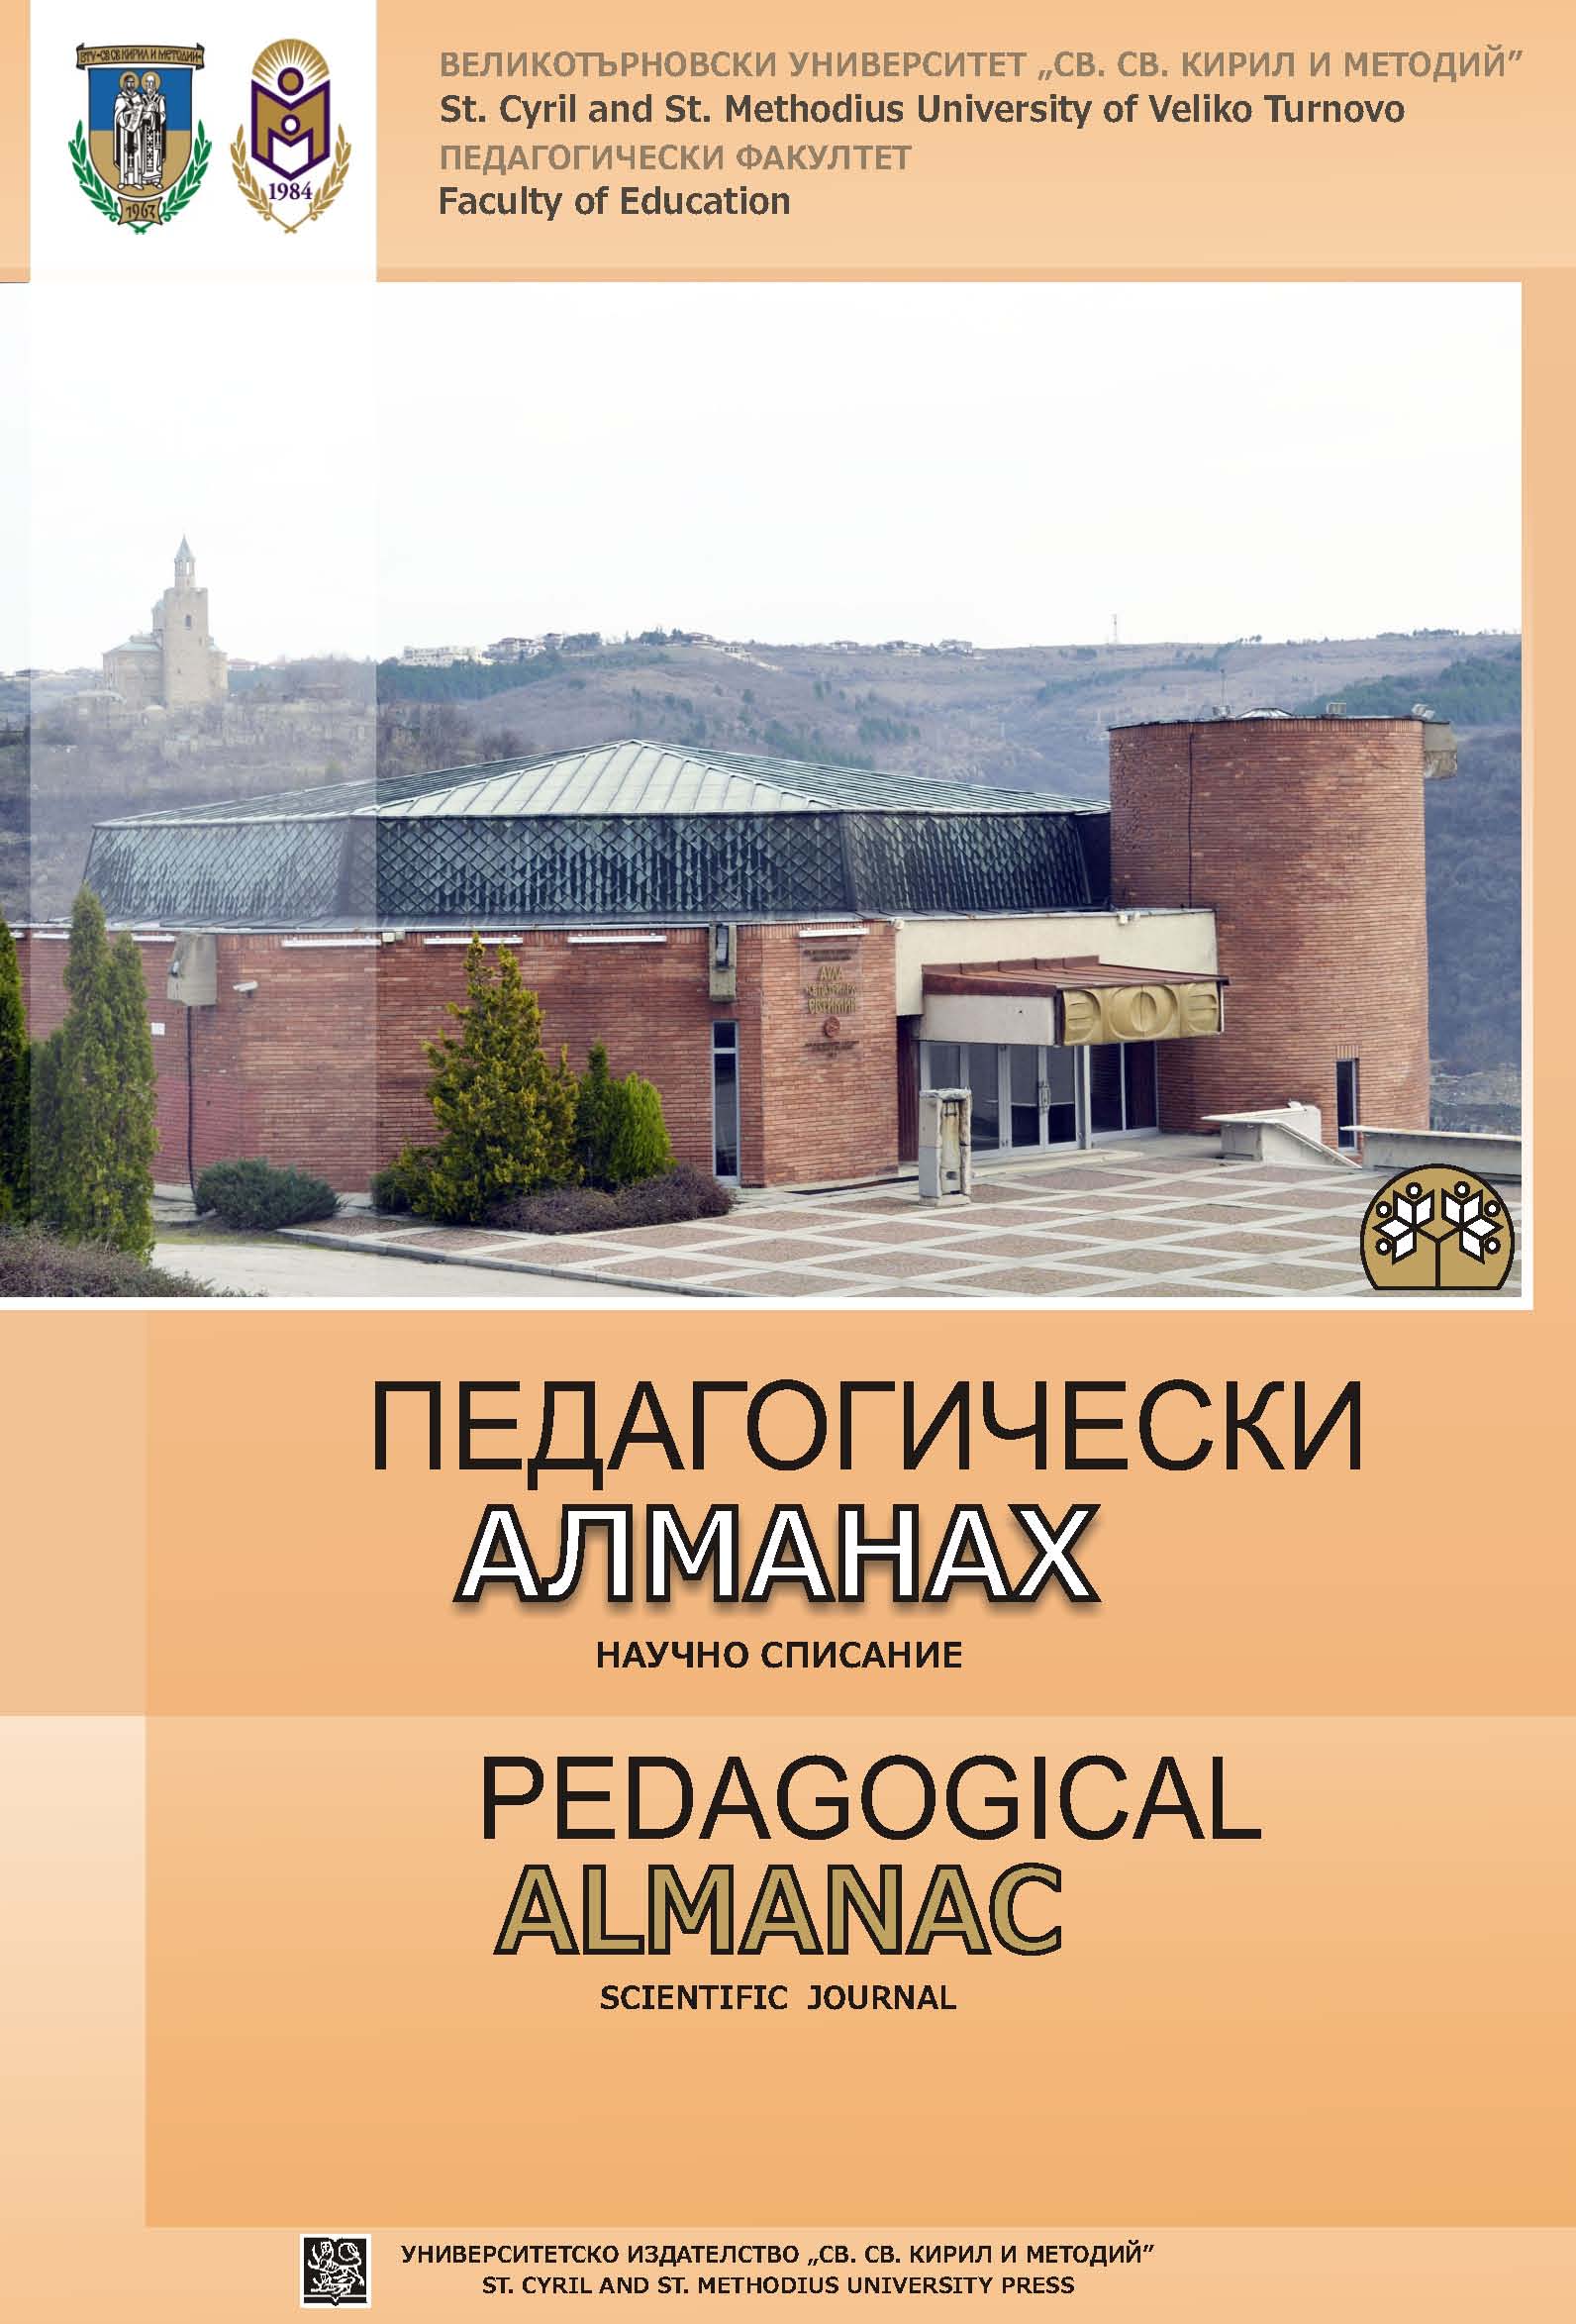 Social-Personal Development in Childhood asa Priority of Child-Environment Pedagogic Interaction Cover Image